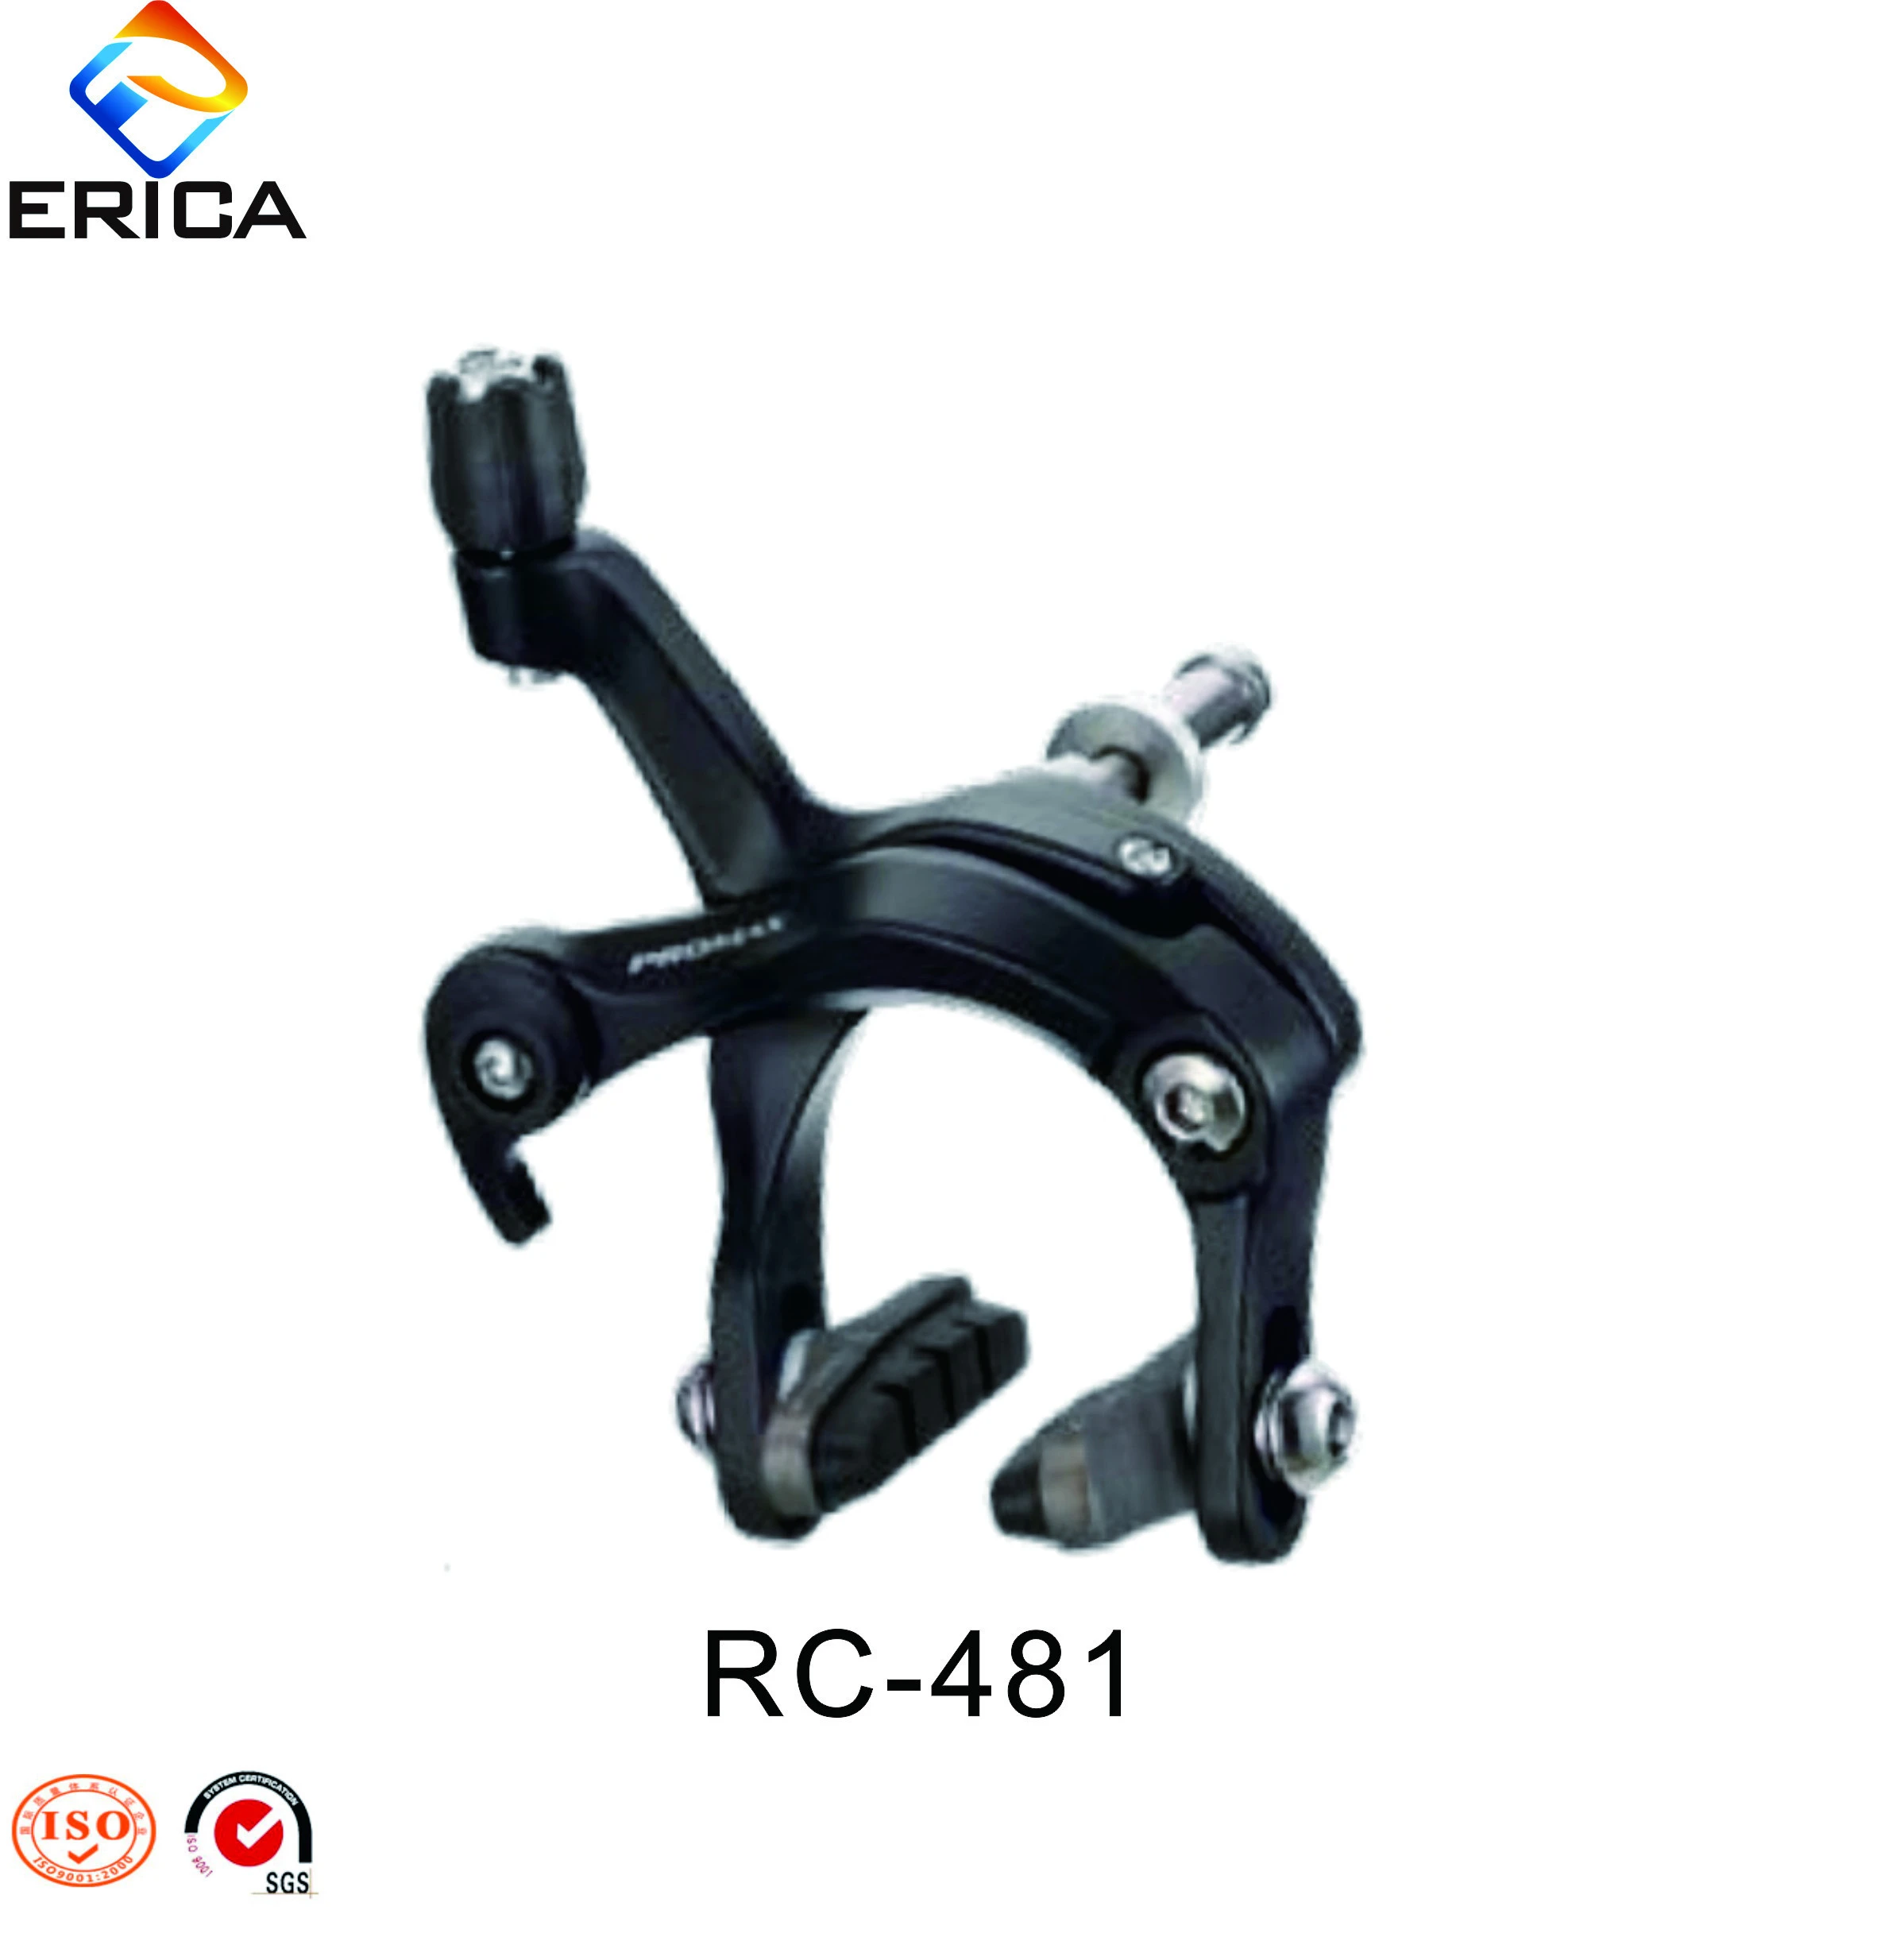 2016 Newest High Quality Alloy Arm 700c Road Bicycle Brake